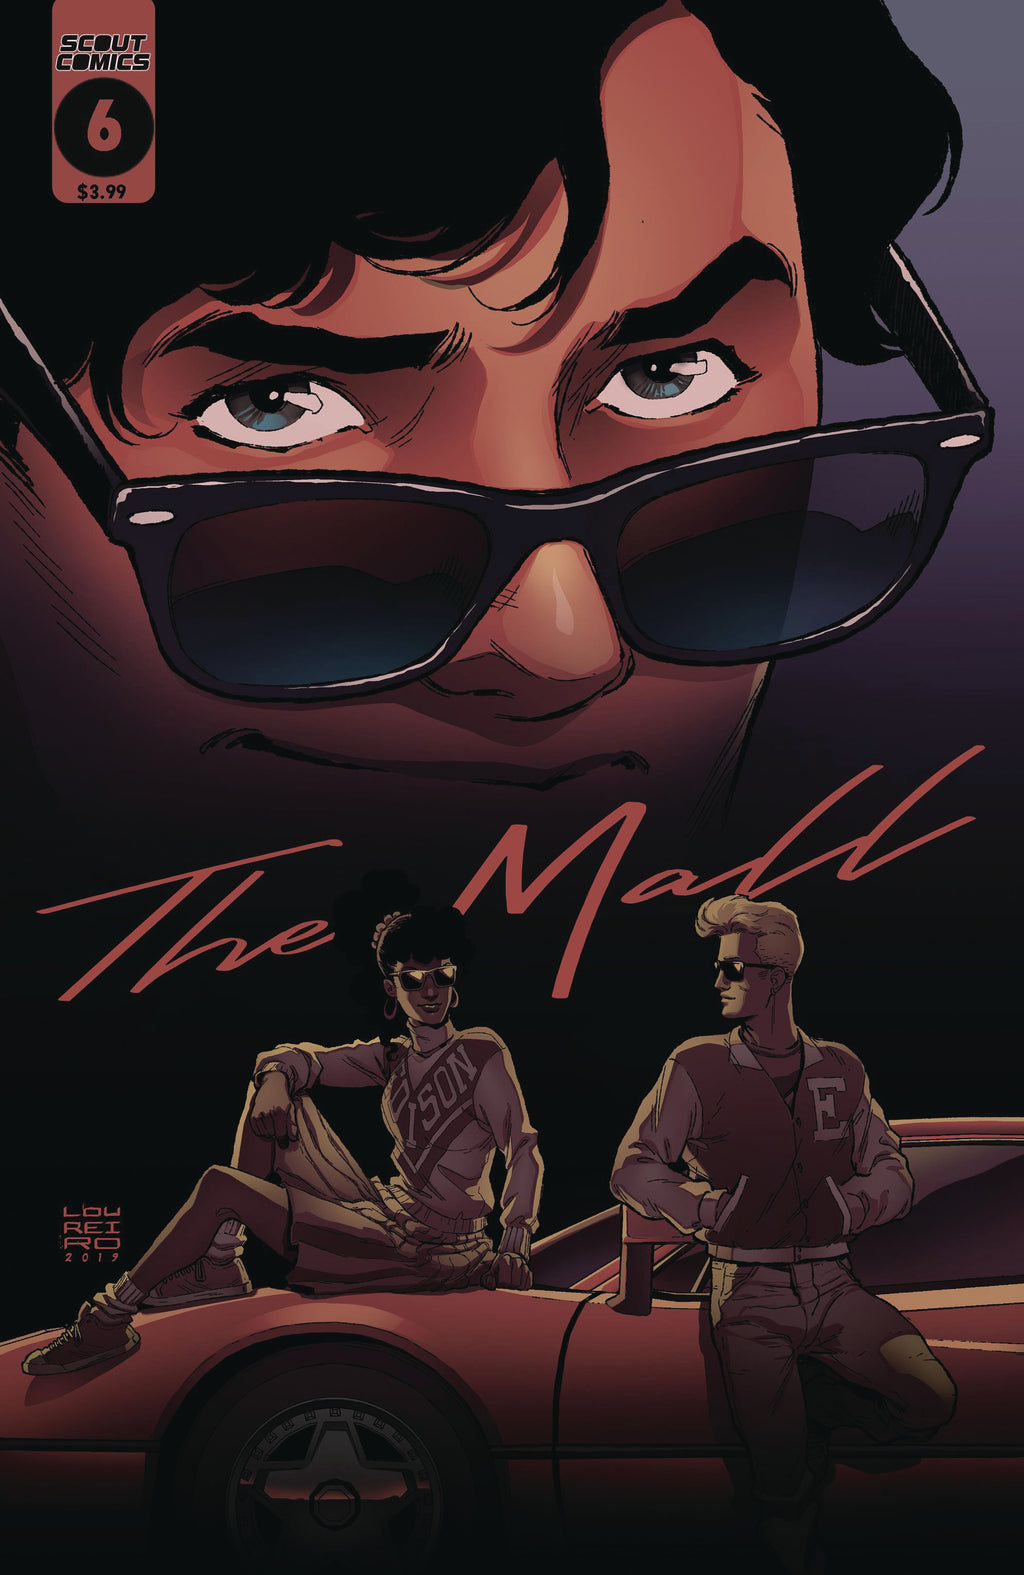 The Mall #6 - Retailer Incentive Cover